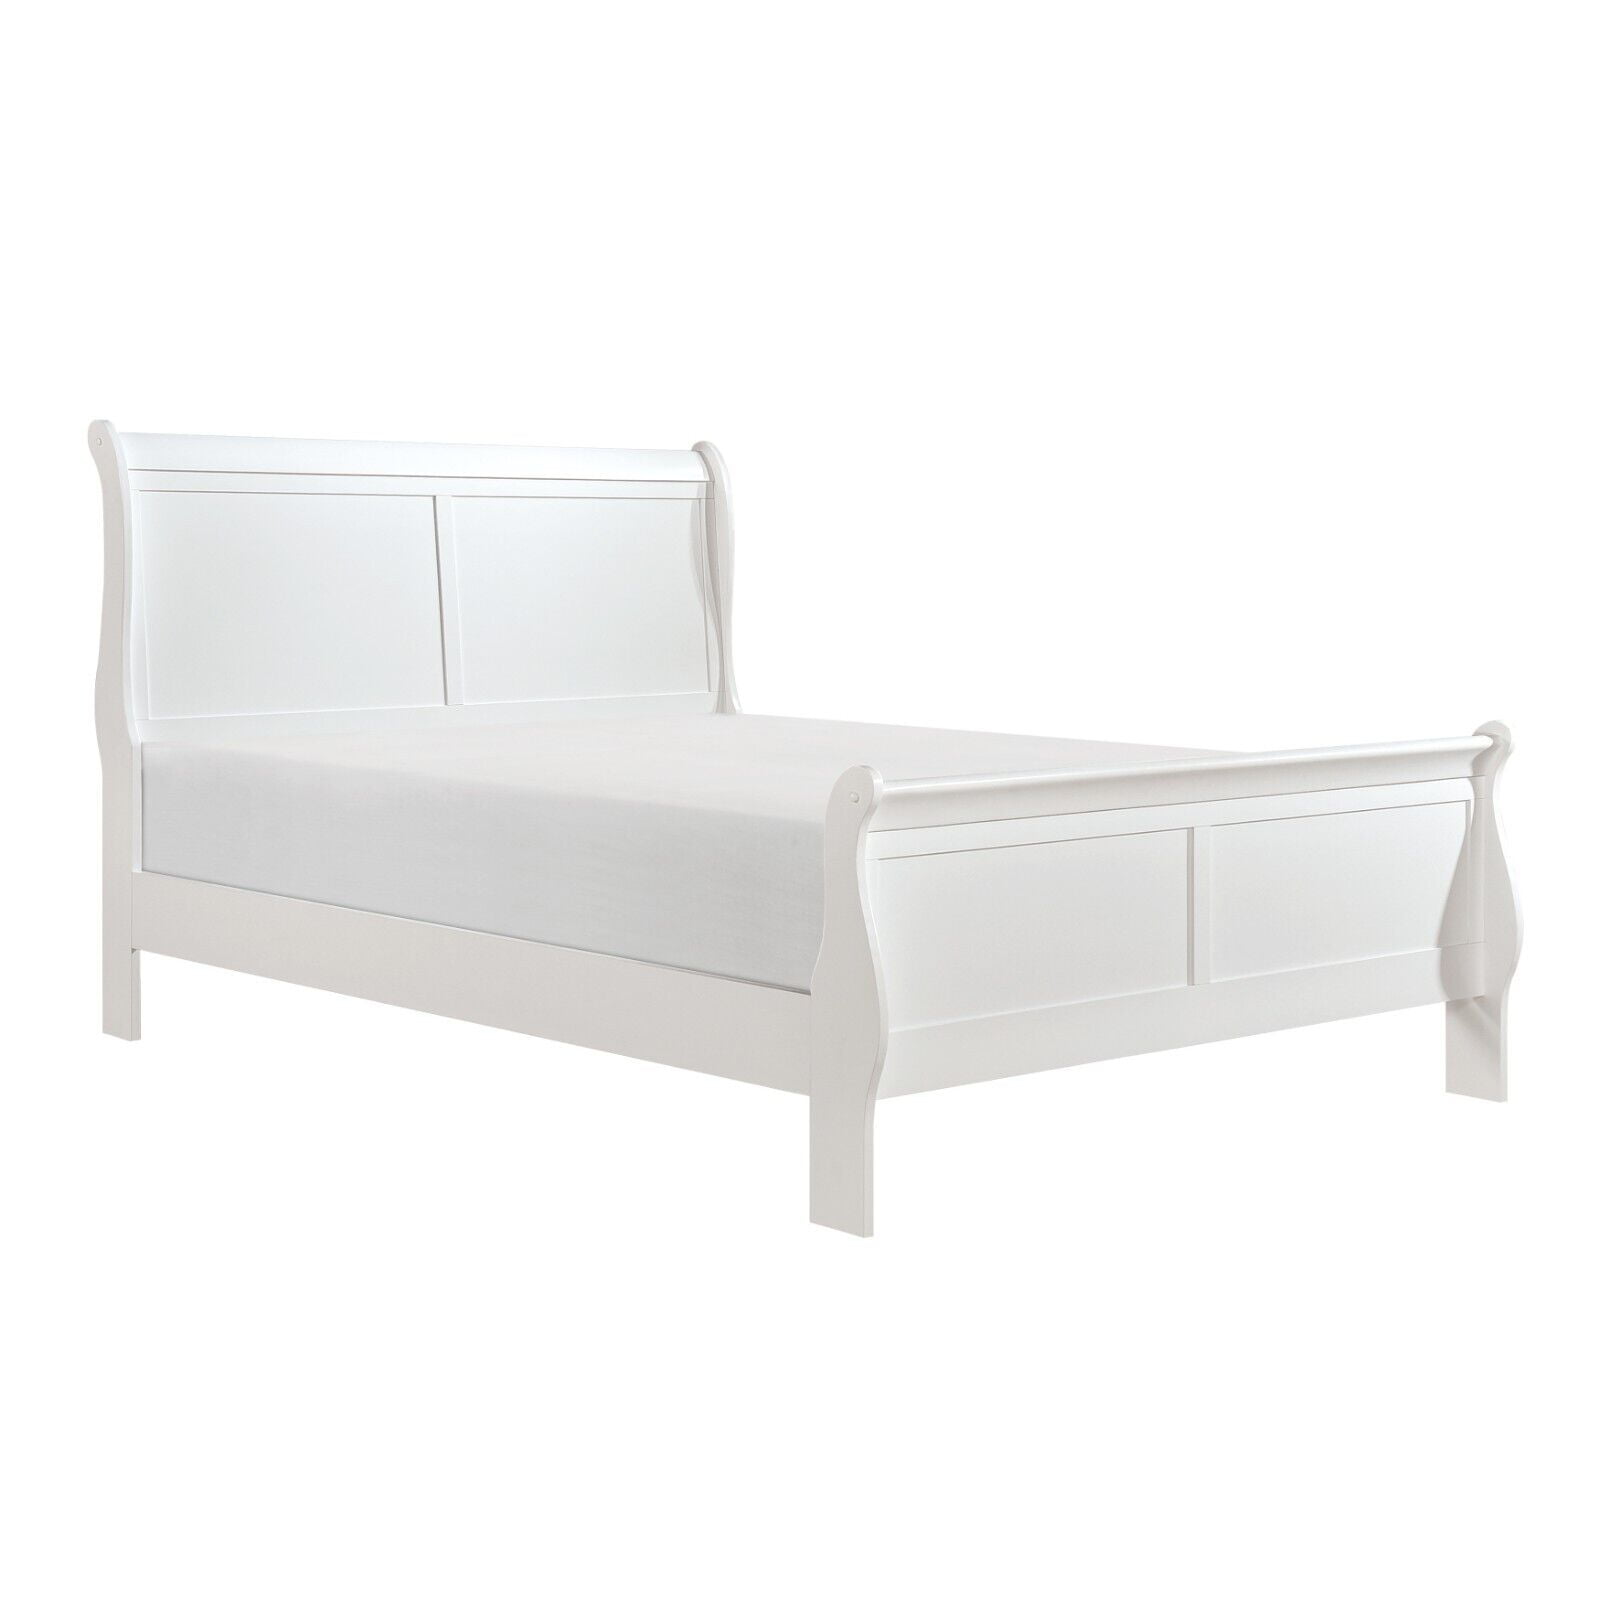 Louis Philippe III Cherry Eastern King Sleigh Bed w/Dresser and Mirror  Jerusalem Discount Furniture